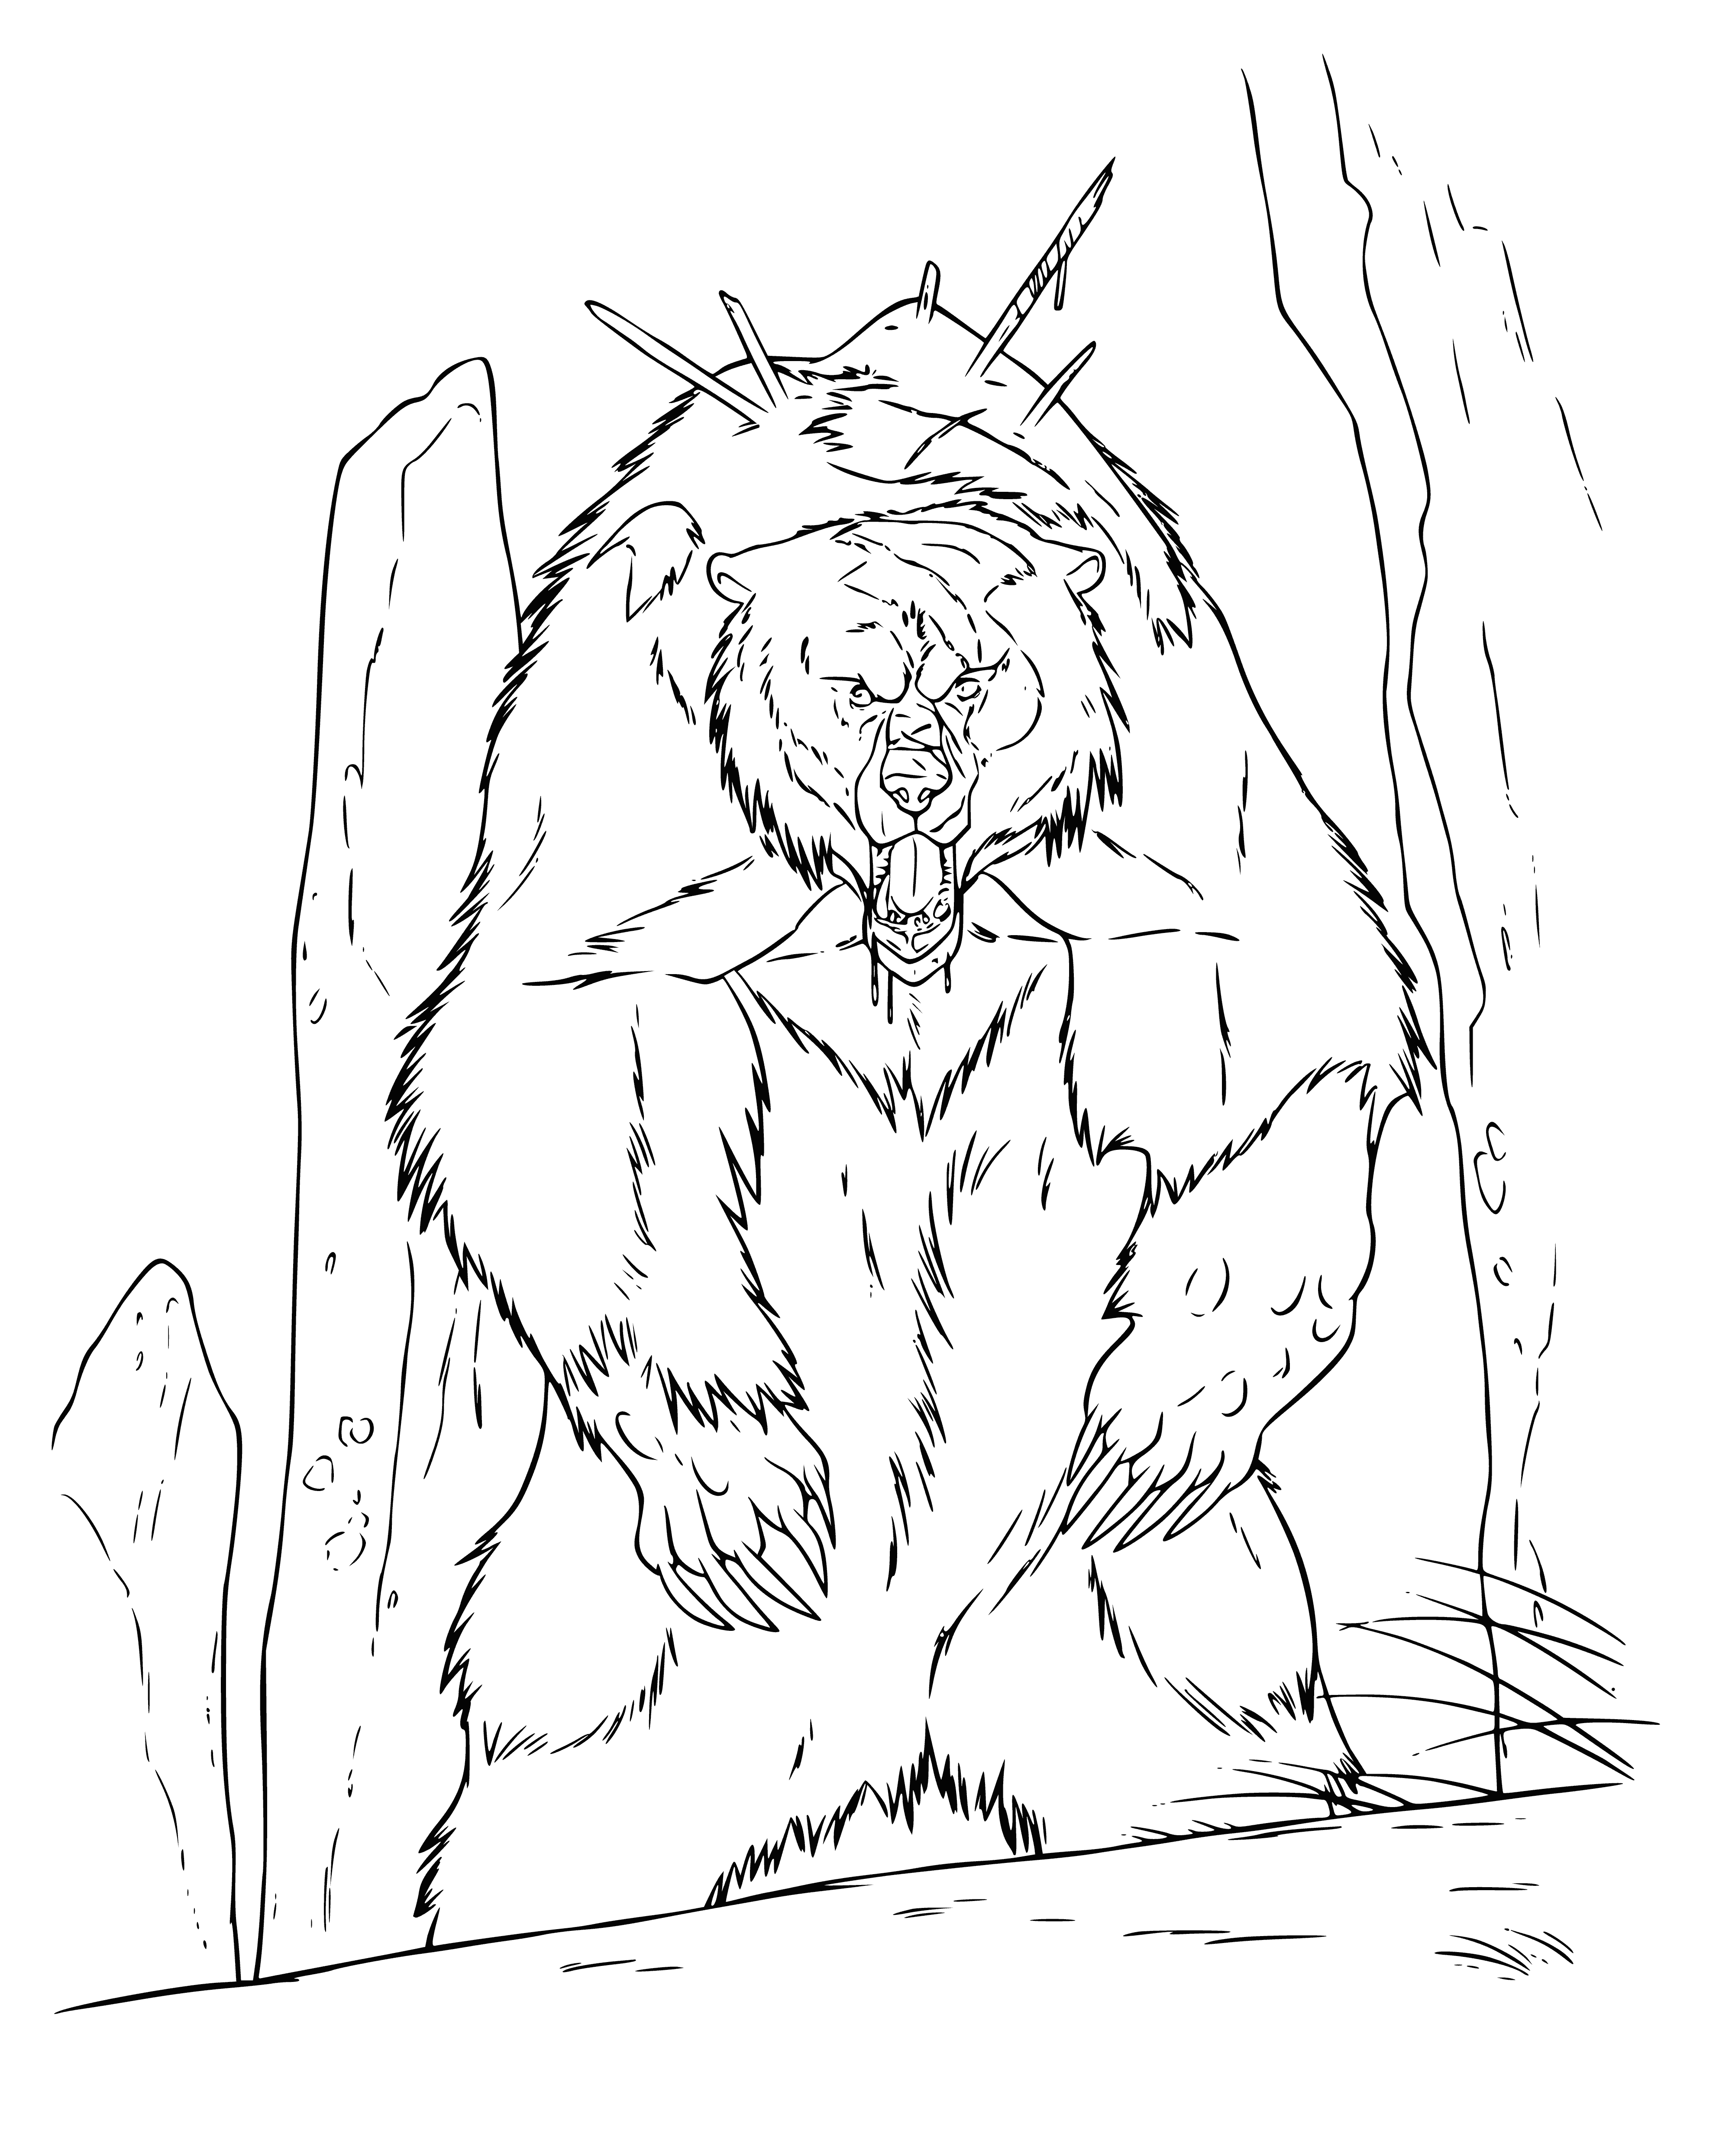 coloring page: A light brown bear with tan muzzle, black strap, closed eyes, & open mouth showing teeth.